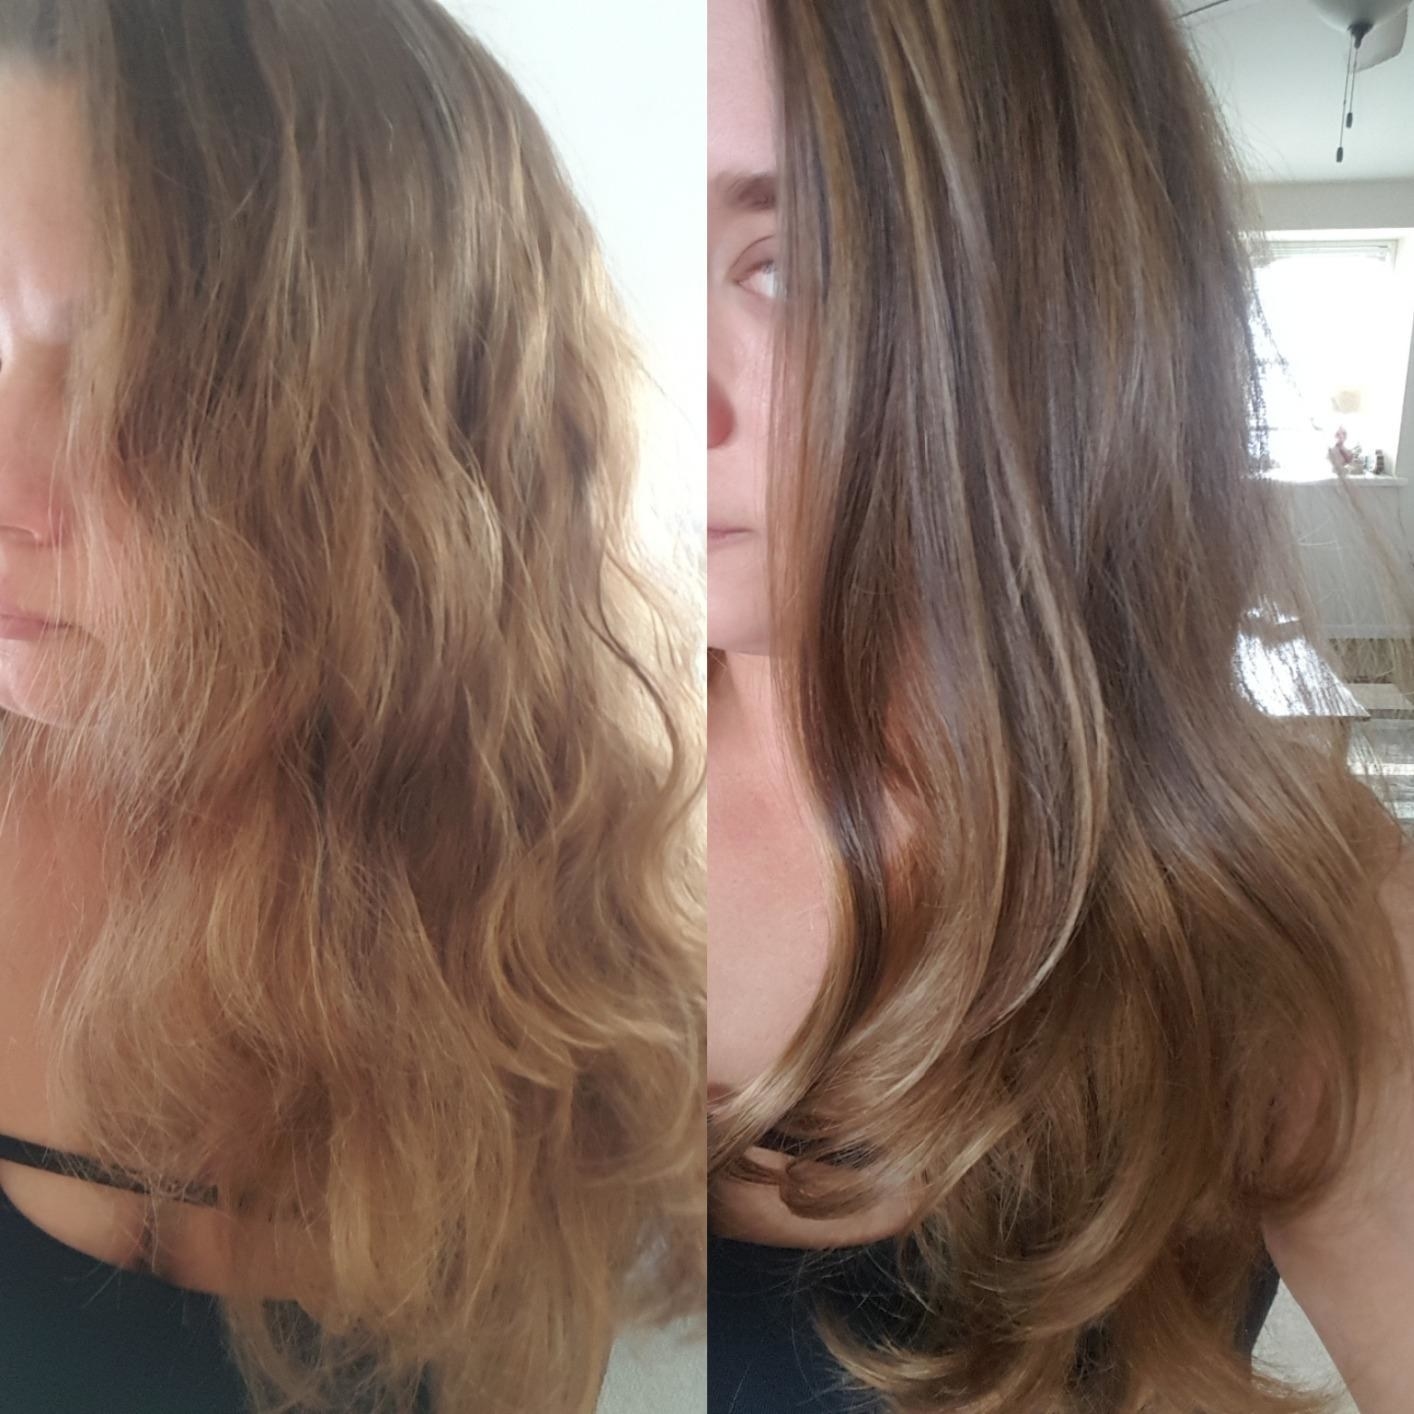 Reviewer photos of hair before and after using the brush. The before photo shows frizzy hair and the after photo shows smooth hair with soft curls